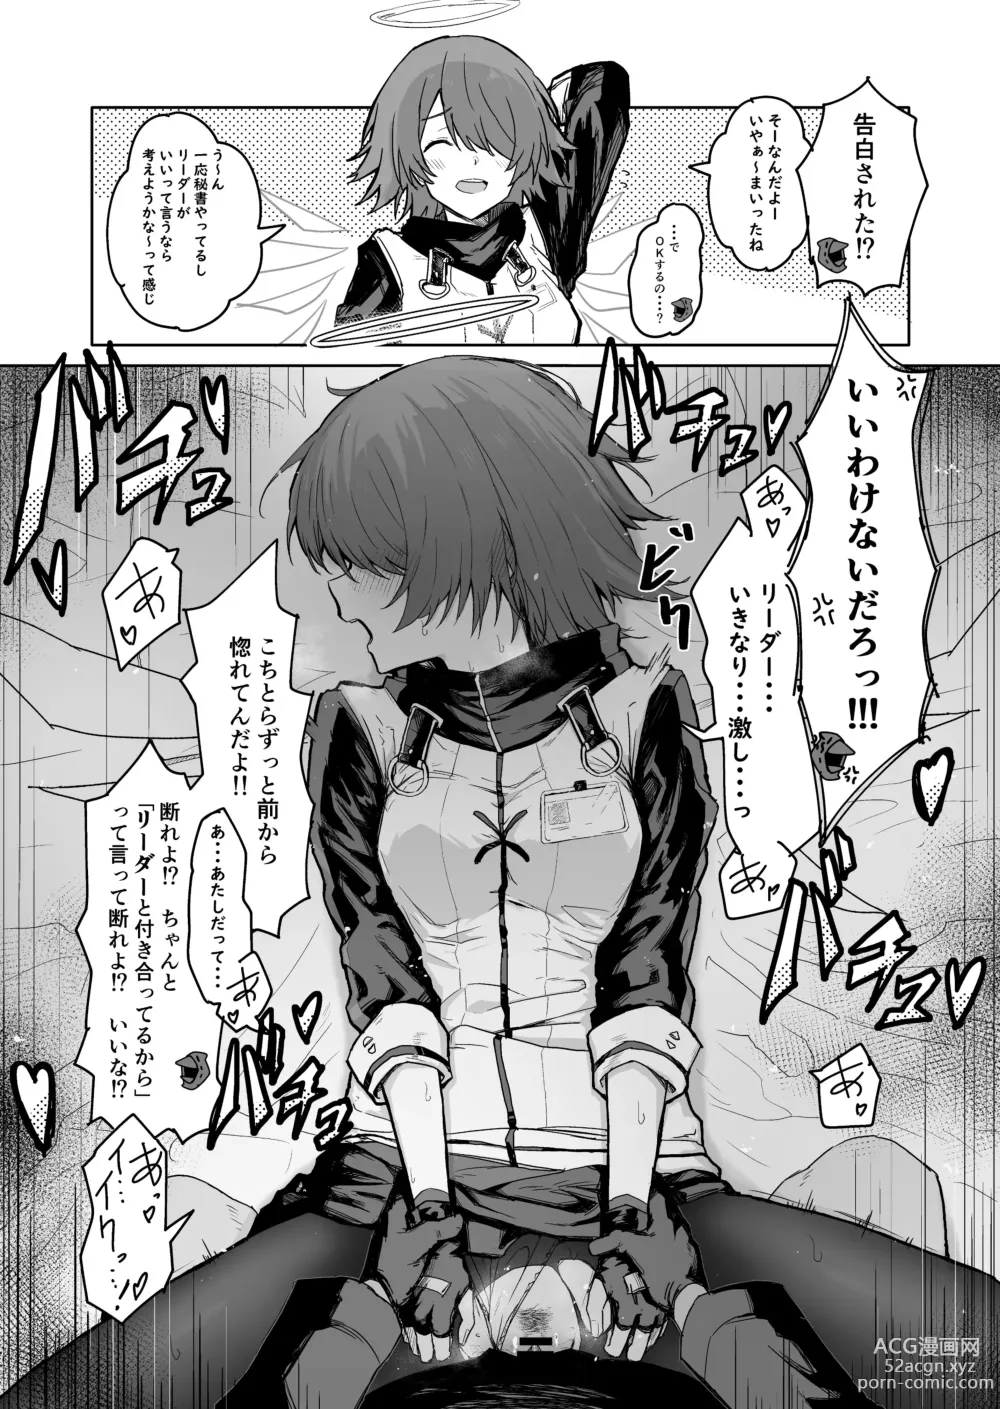 Page 26 of doujinshi Twitter collection